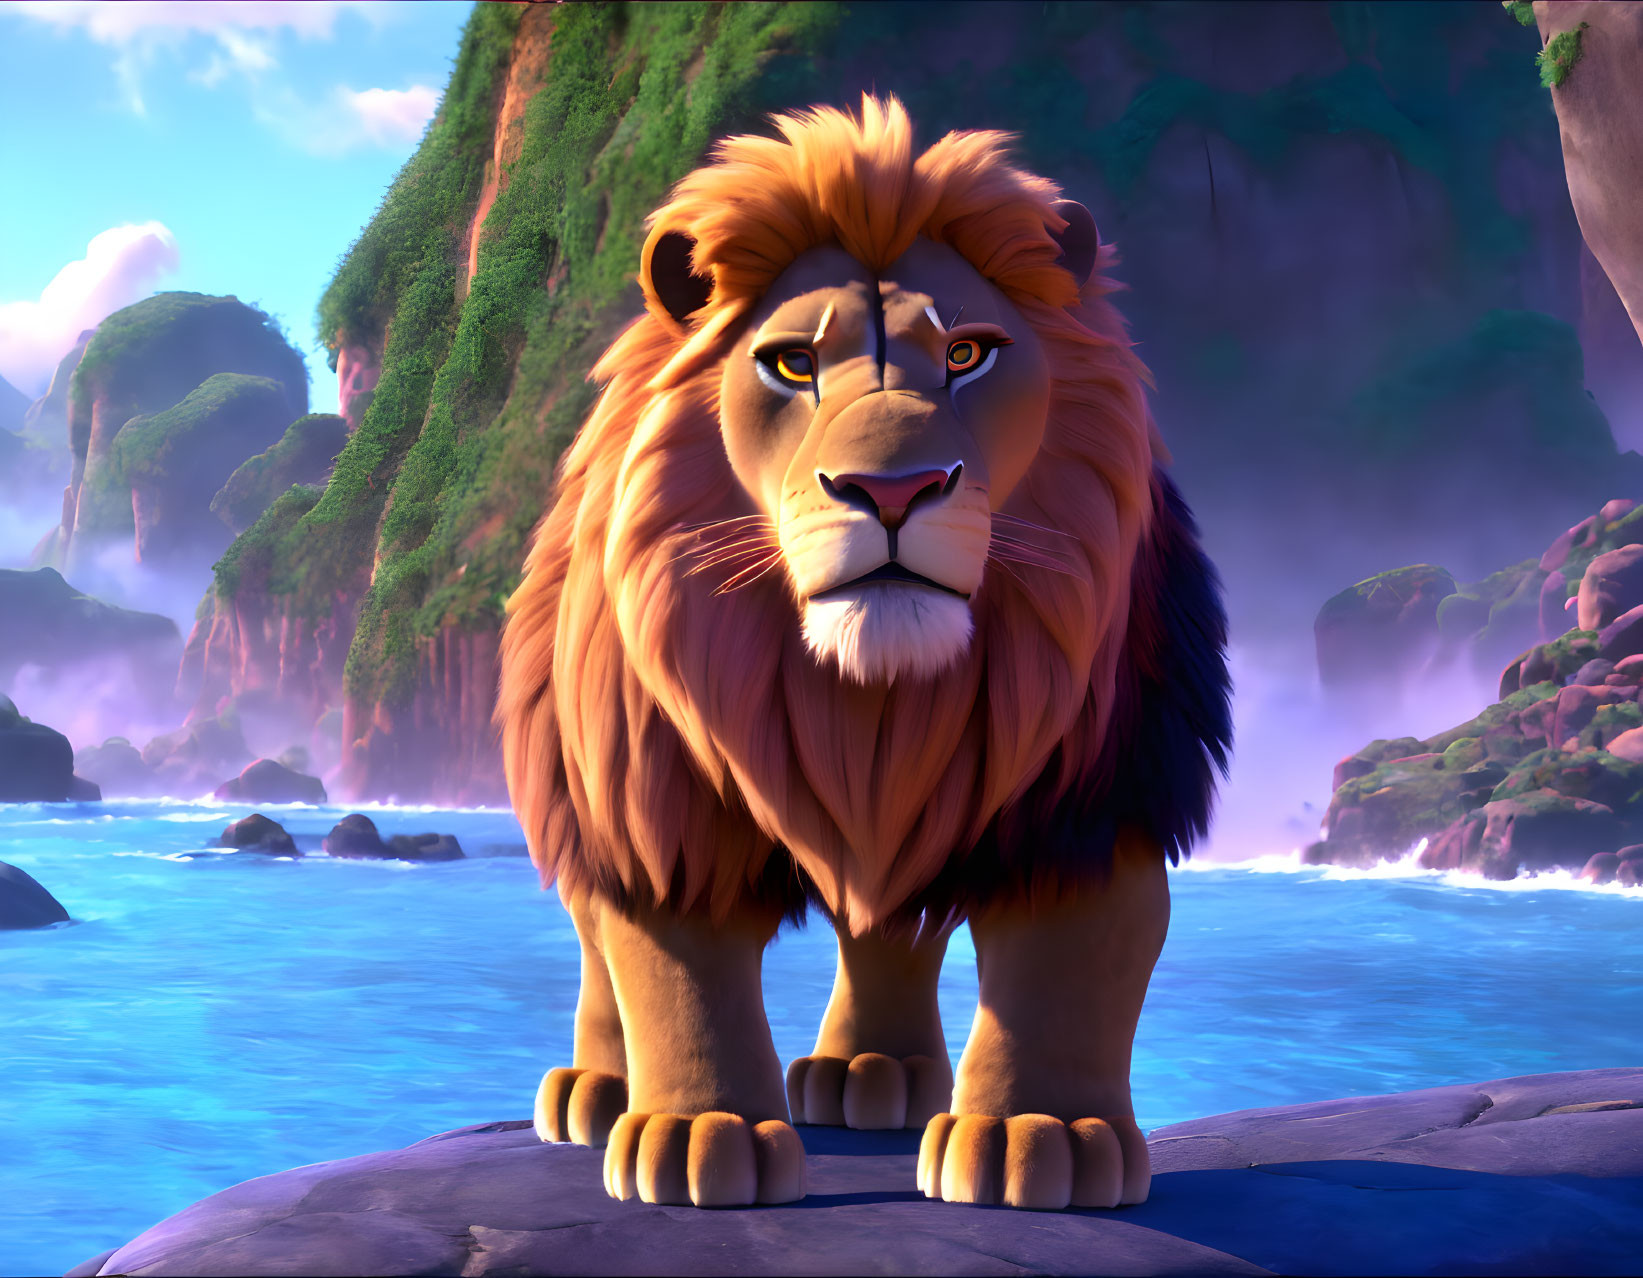 Majestic animated lion with lush mane on rocky outcrop overlooking serene ocean and green cliffs.